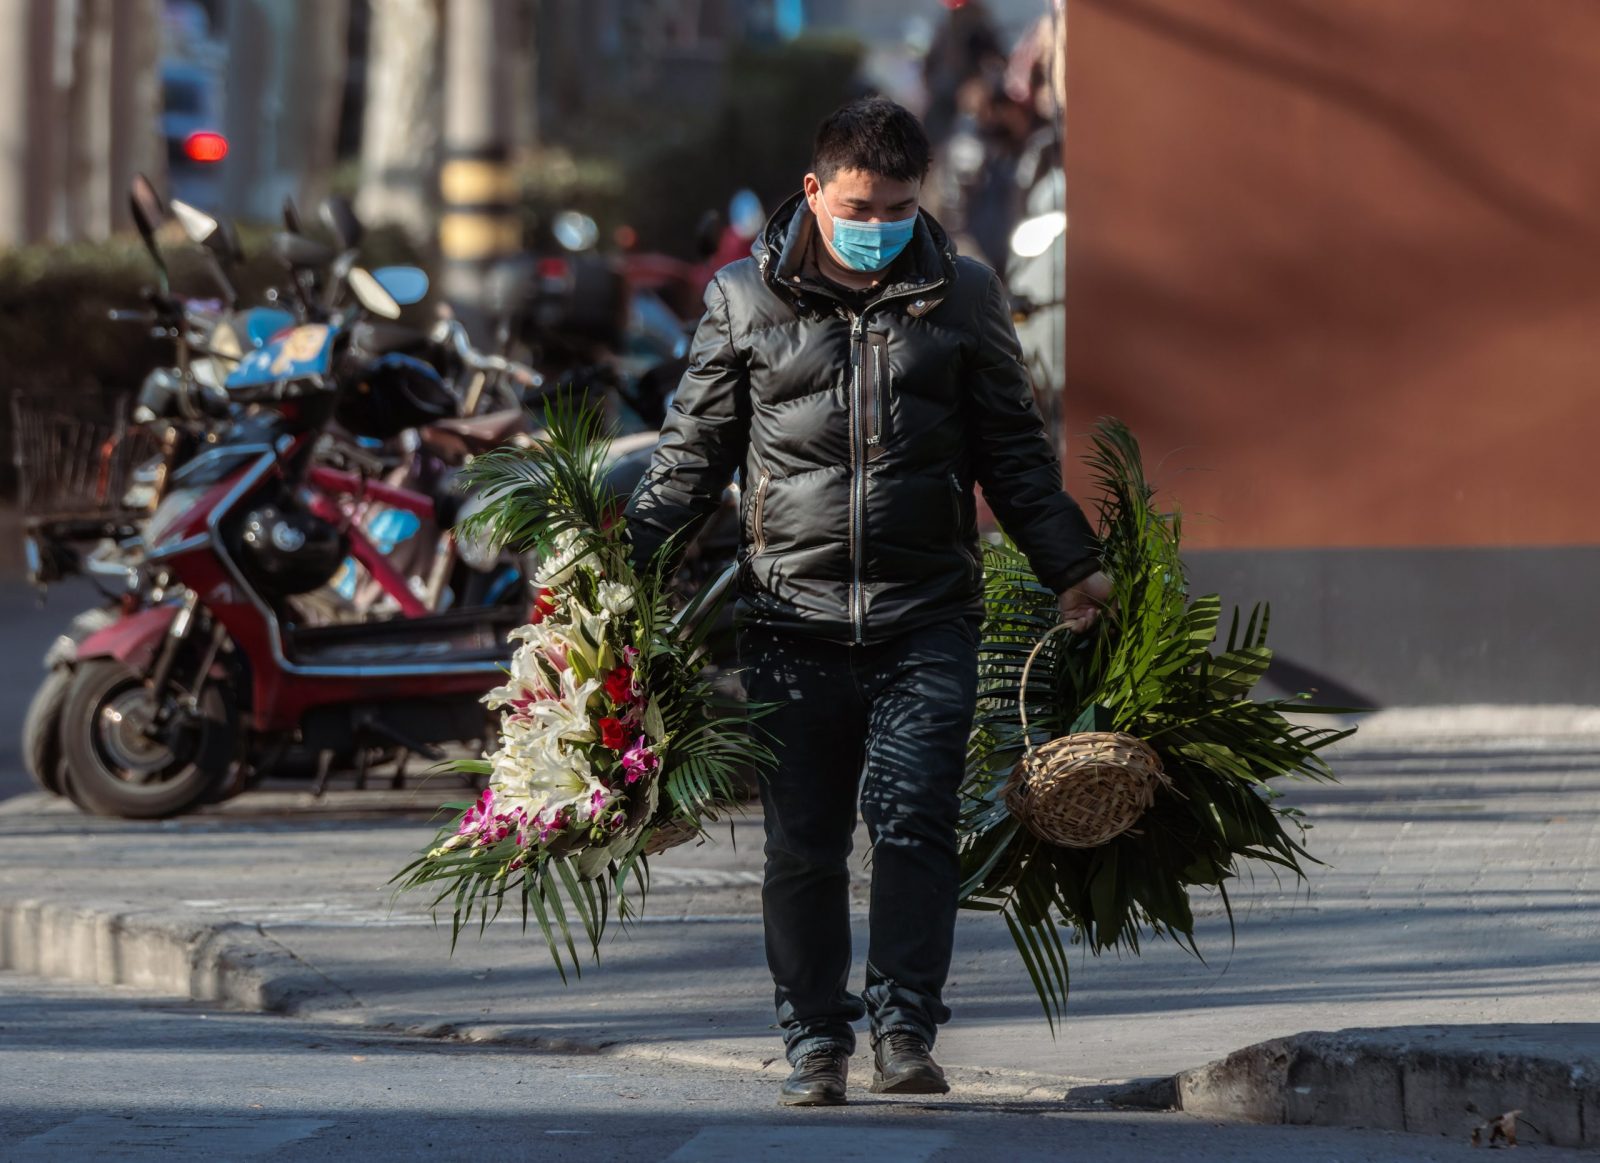 epa10388598 A man carries flowers in front of the funeral home, in Shanghai, China, 04 January 2023. Mortuaries and funeral homes in China have been overwhelmed amid the recent outbreak of COVID-19 pandemic with numerous bodies awaiting cremation. There have been an estimated 9,000 deaths and 1.8 million infections per day across China, according to the data released by Health risk analysis firm Airfinity on 29 December 2022.  EPA/ALEX PLAVEVSKI